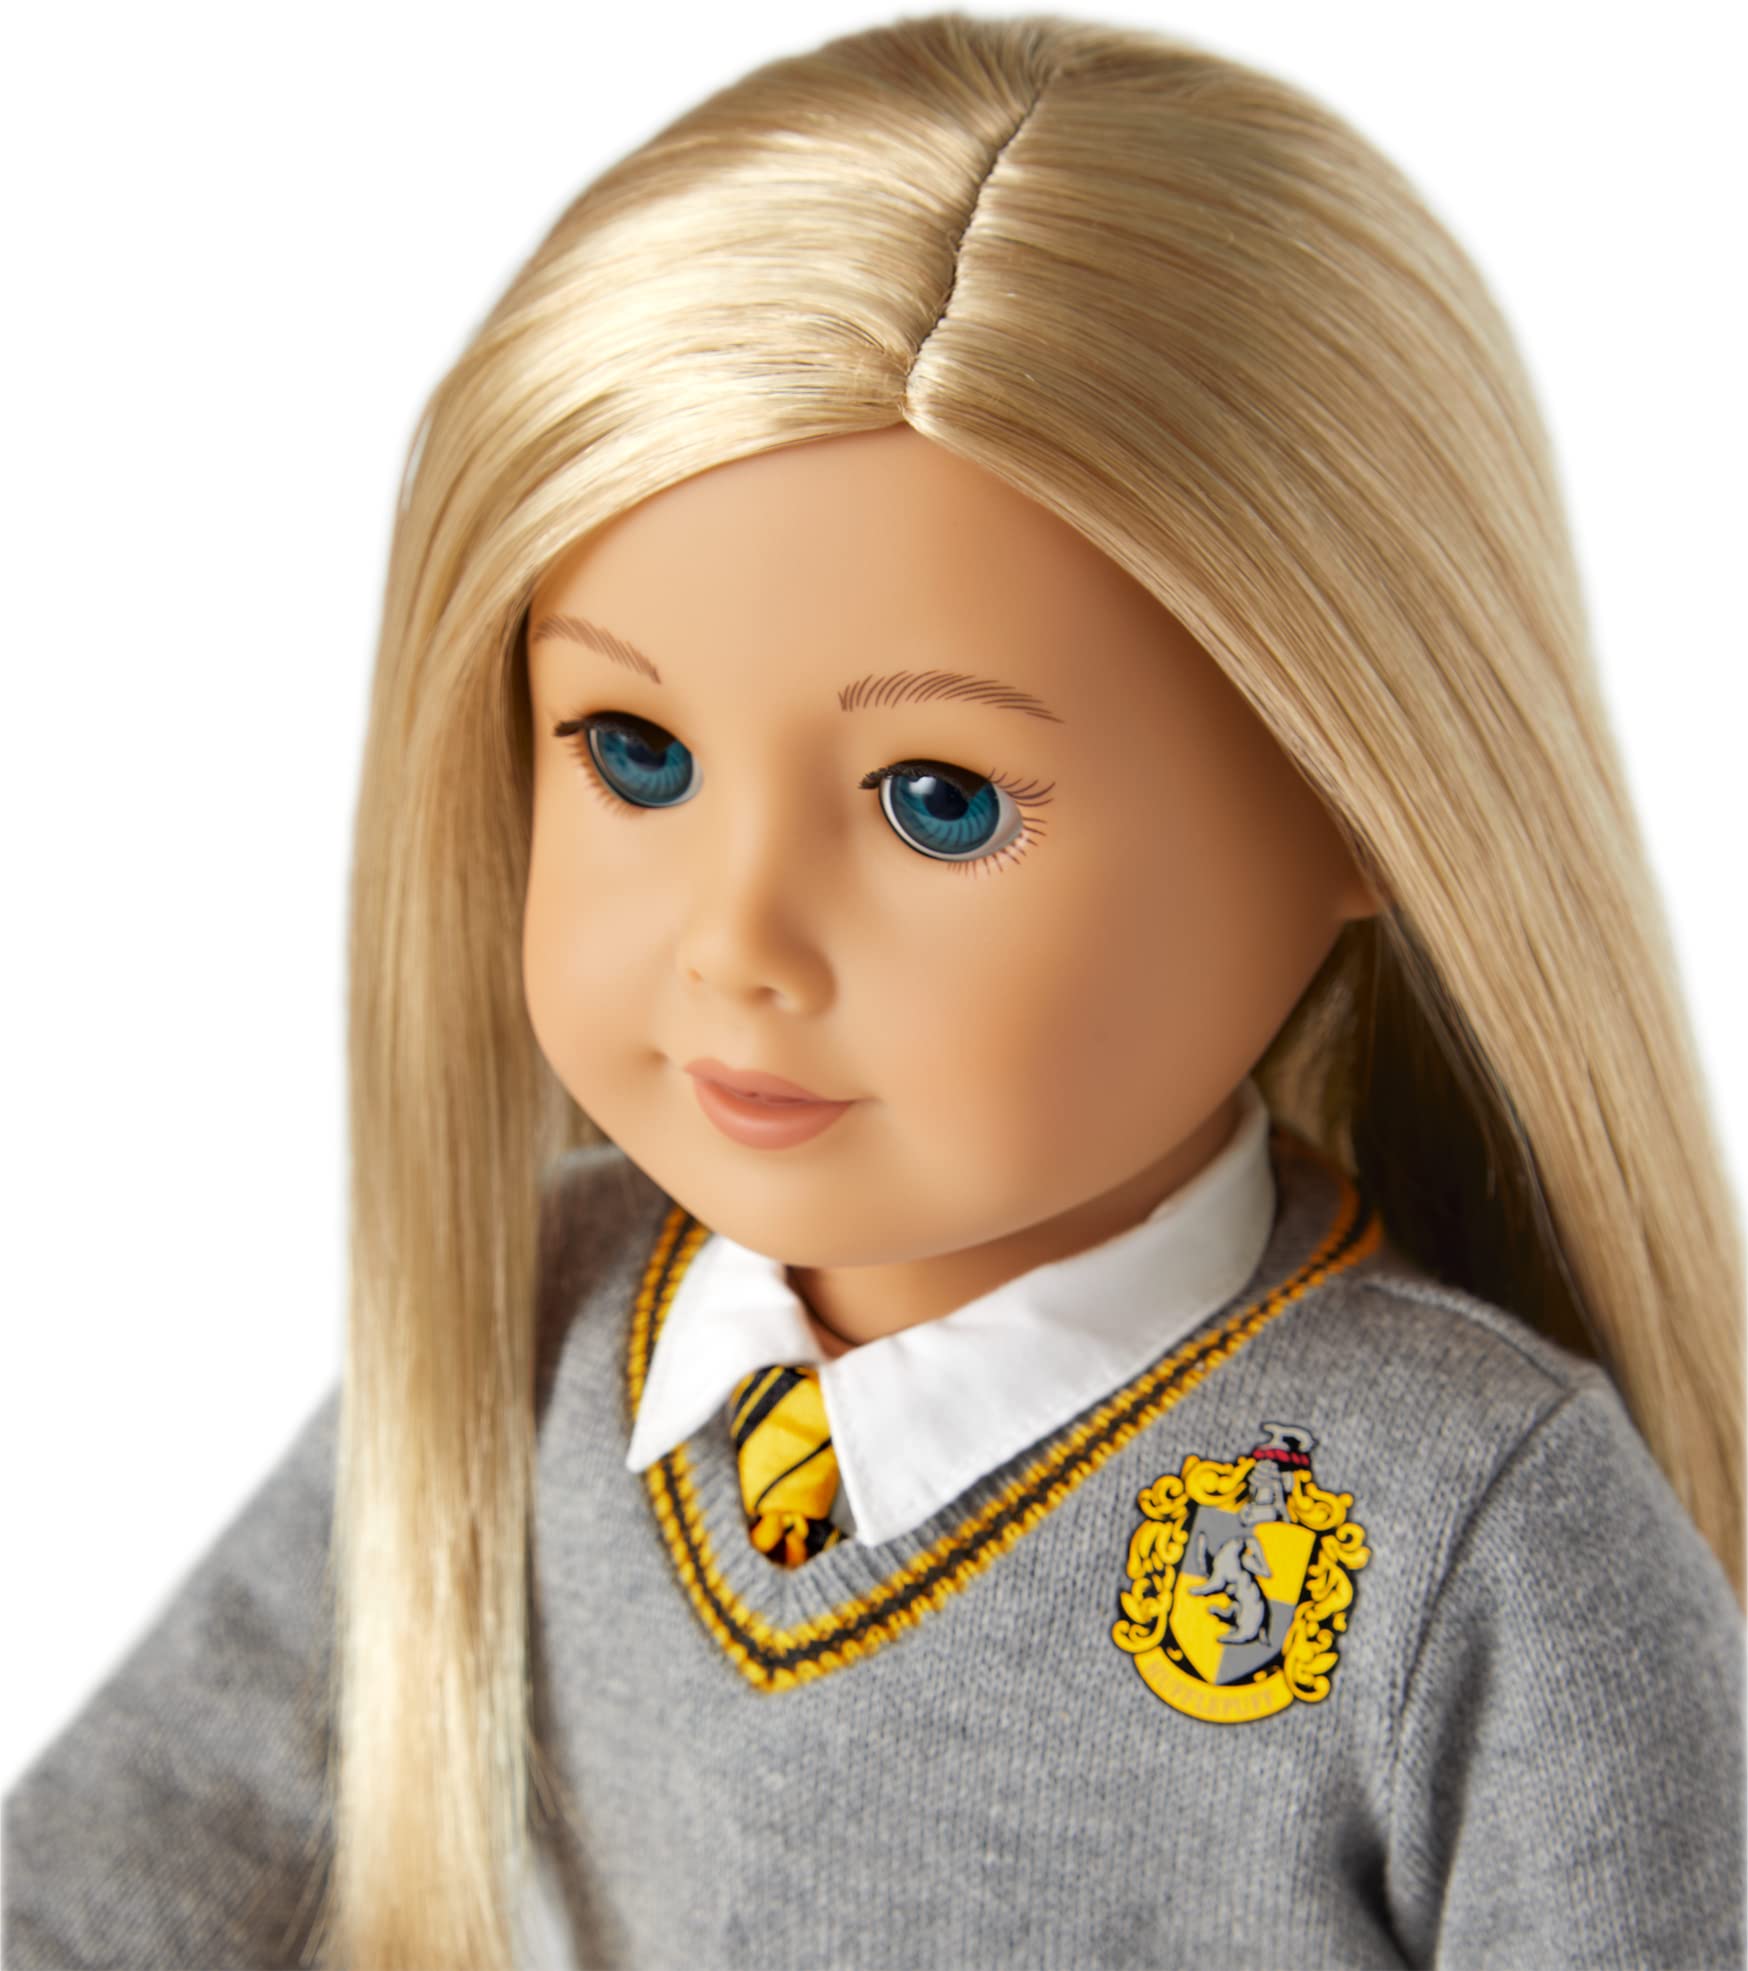 American Girl Harry Potter Hufflepuff 3-Piece Set for 18-inch Dolls with Yellow-and-Black-Trimmed Gray Sweater, Satin tie, Yellow-and-Black Knit Scarf Featuring The Hufflepuff Crest Doll Not Included